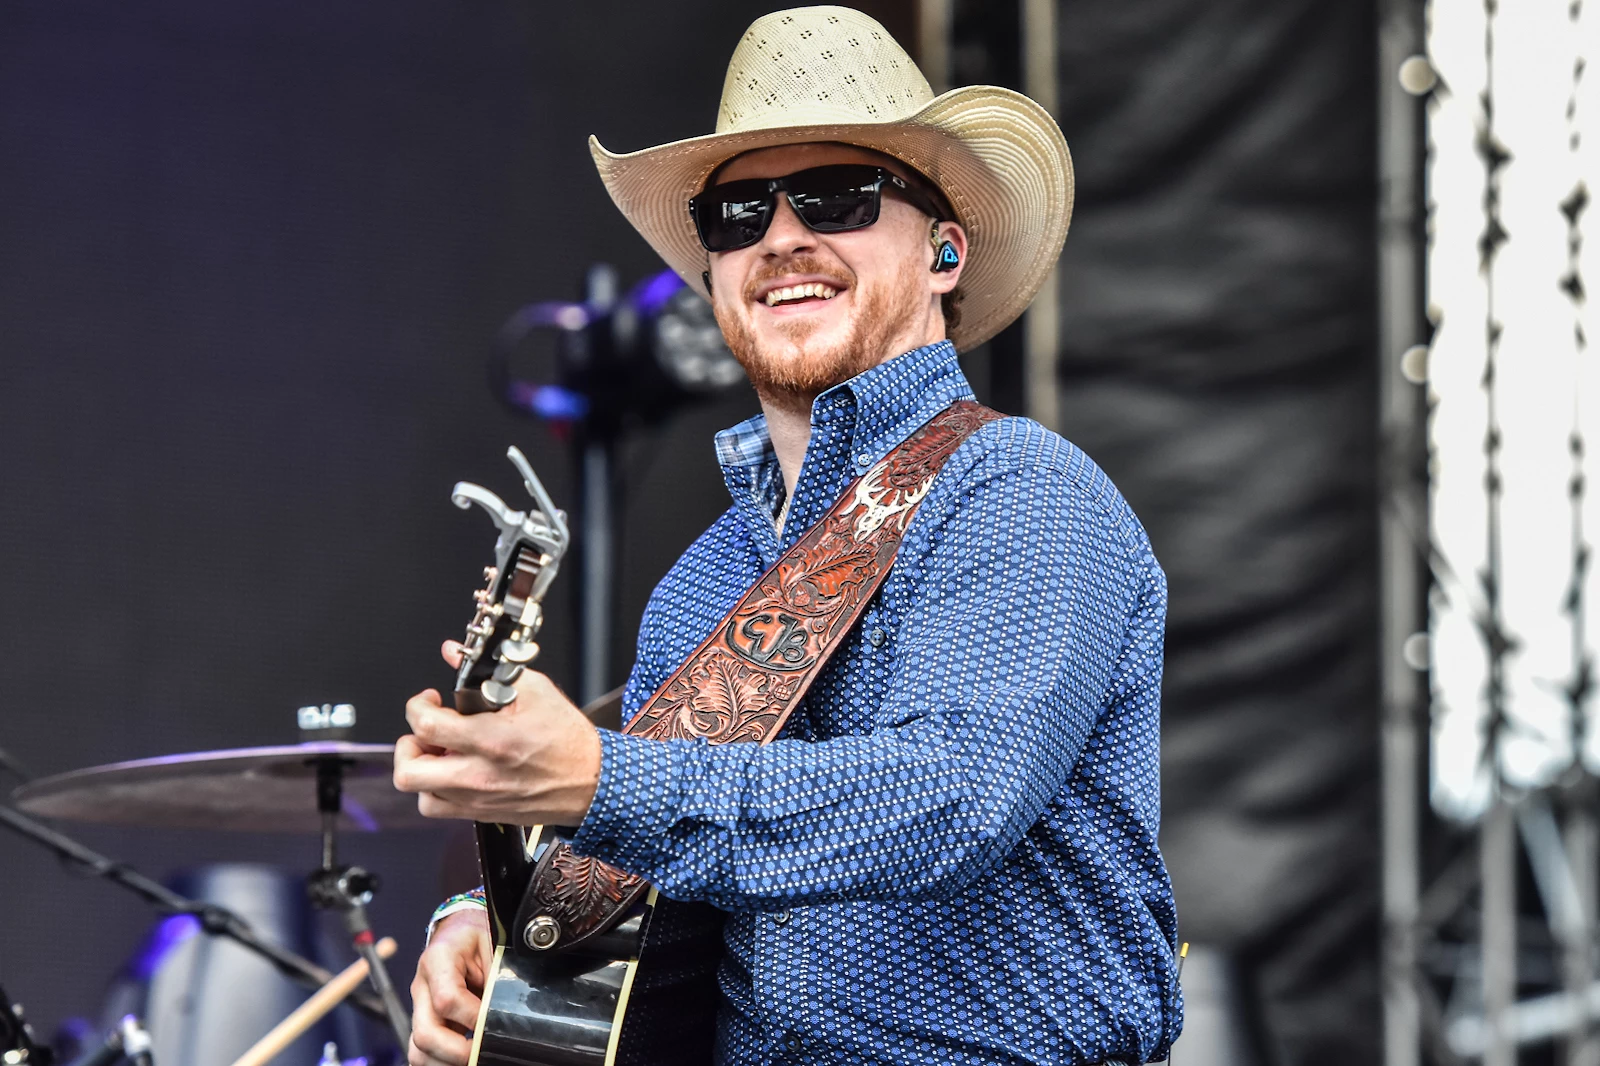 WATCH: Cody Johnson's 'Husbands and Wives' Cover Is a Stunner